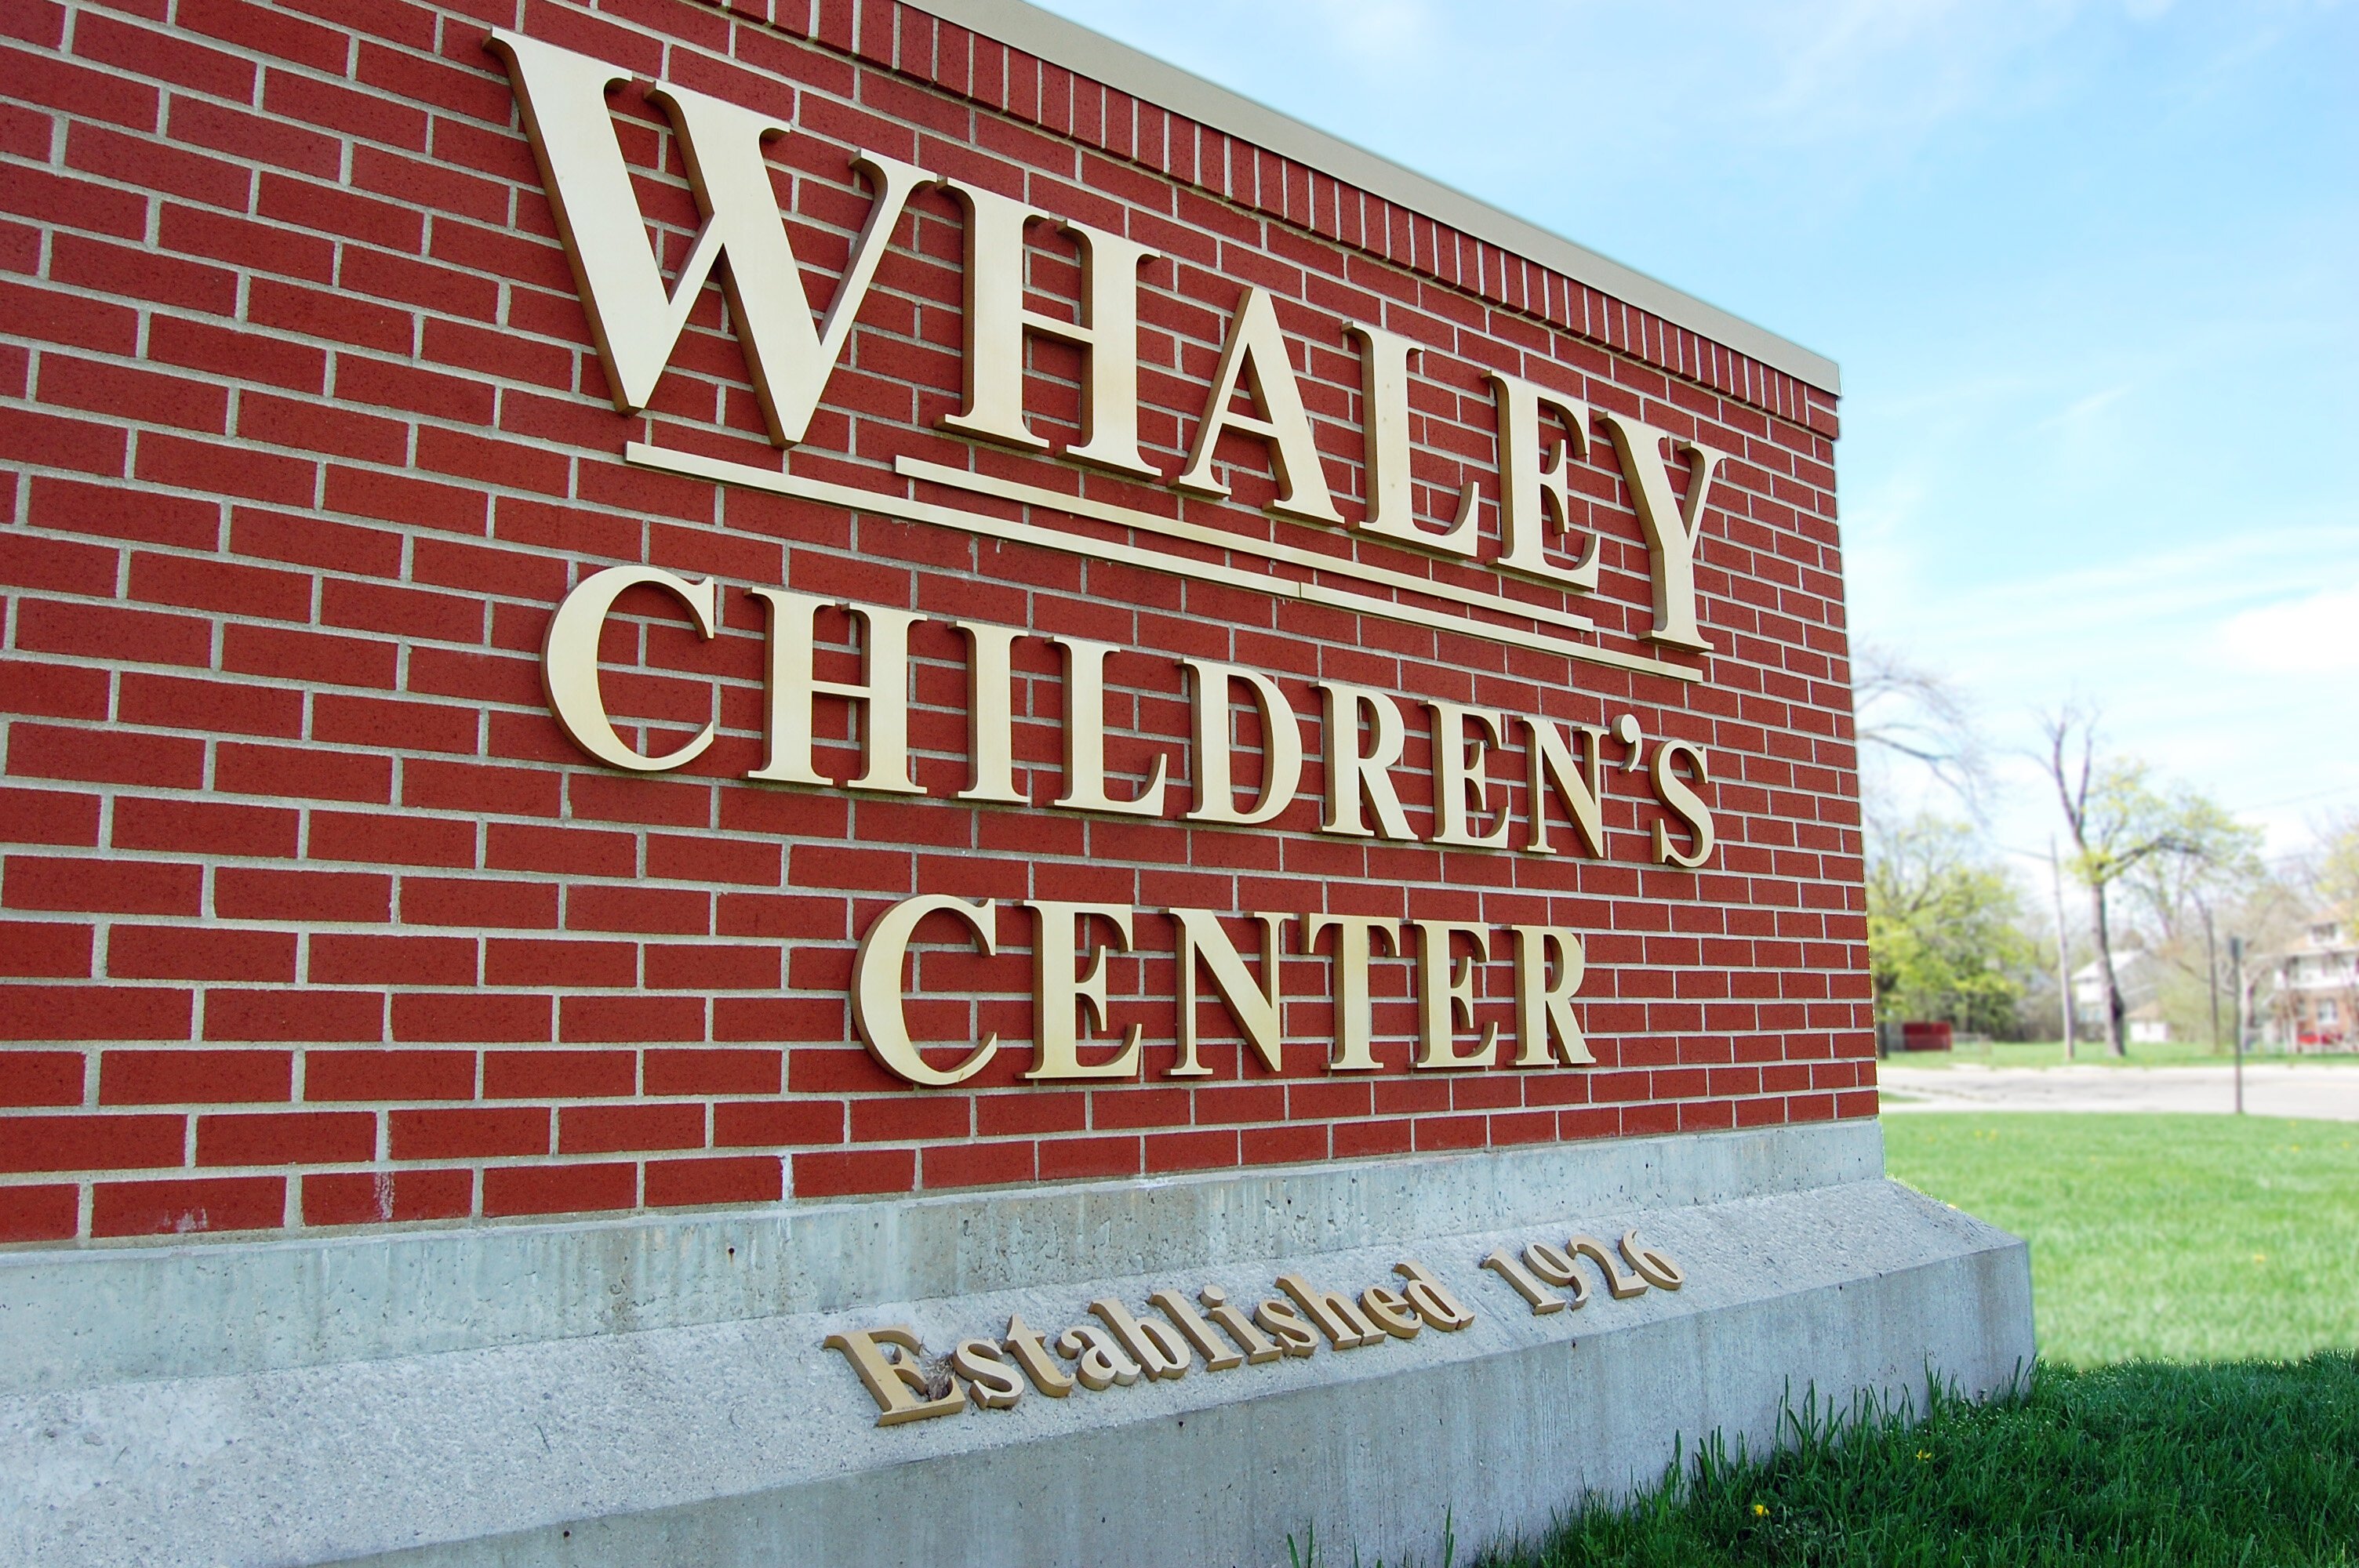 The Whaley Children's Center serves kids ages 5-17 who have suffered abuse and neglect.